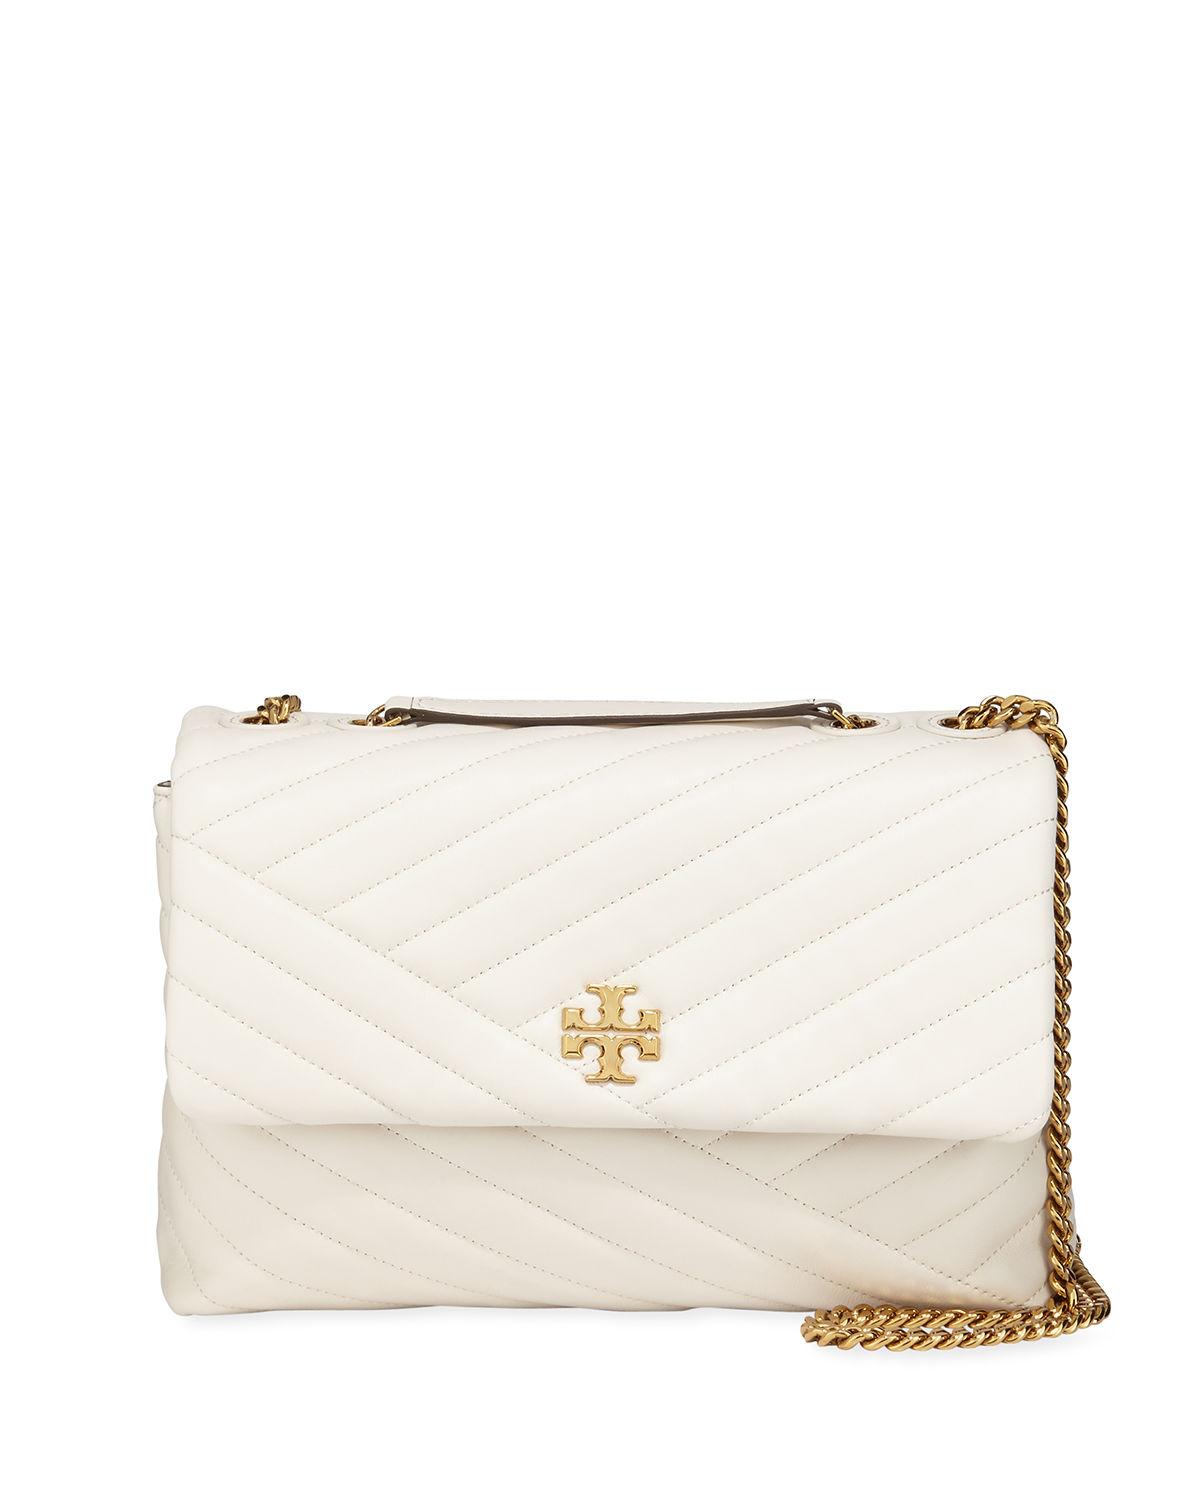 Tory Burch Kira Chevron Leather Shoulder Bag in Taupe (Red) - Save 31% ...